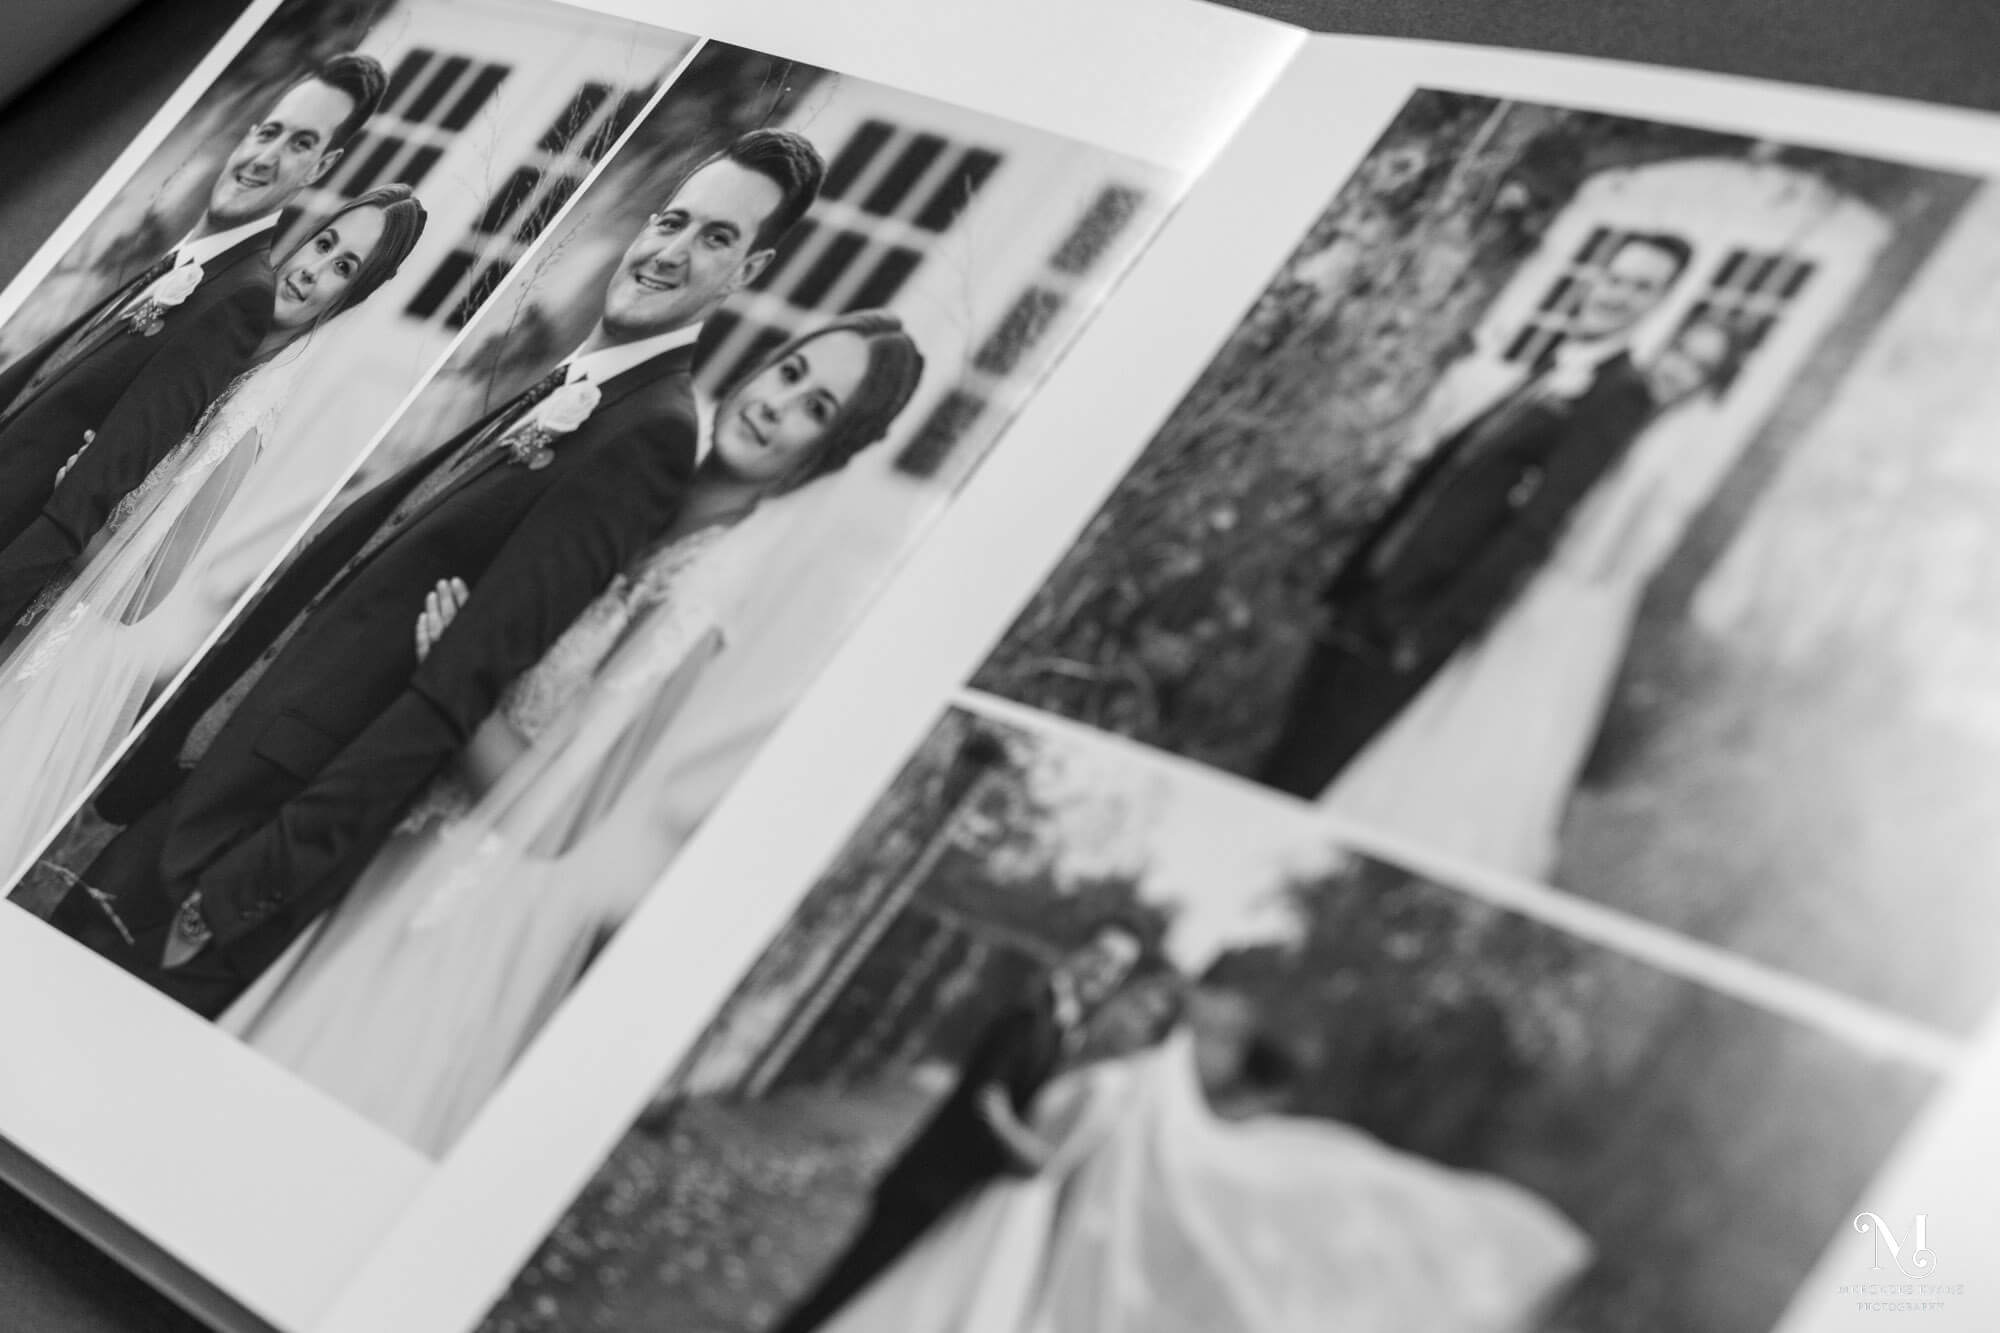 inside of a wedding album shows a bride and groom together in various photographs in black and white